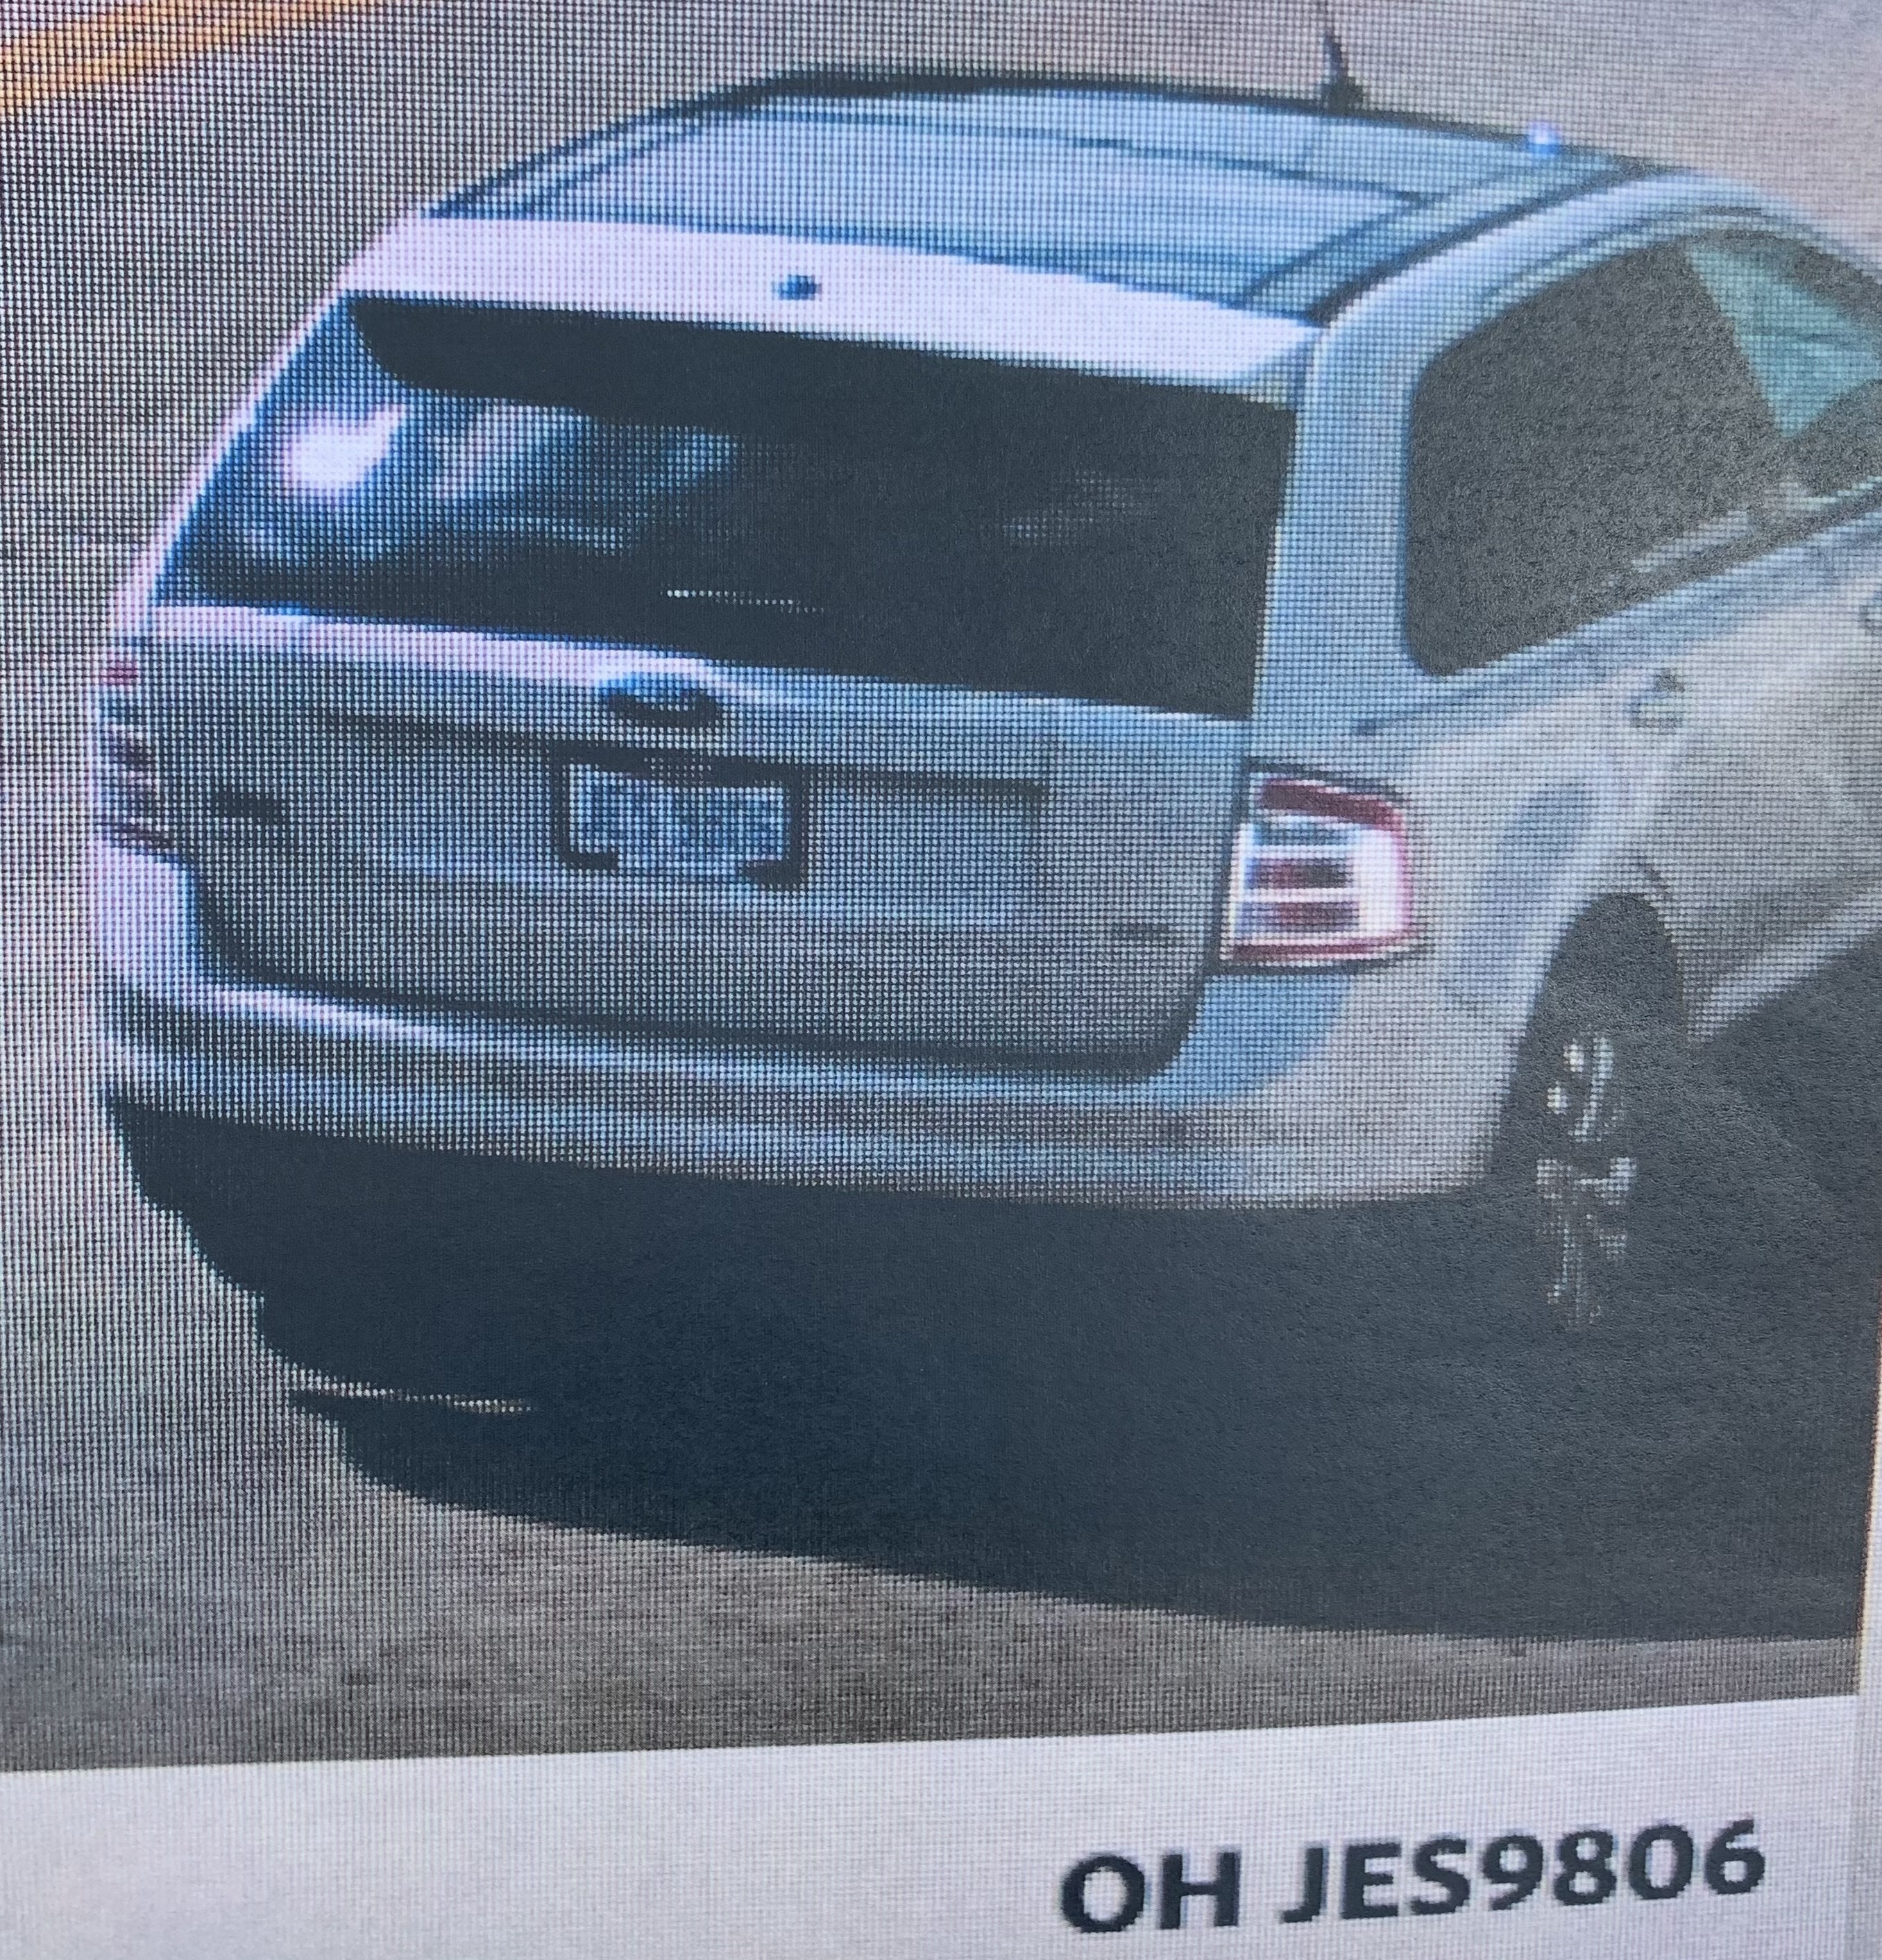 The person of interest wanted in a fatal quadruple shooting on August 5, 2022 at Butler Twp.  he could be driving a white 2007 Ford Edge with Ohio license plate JES-9806, police said.  |  Photo courtesy of Butler Twp.  Police department